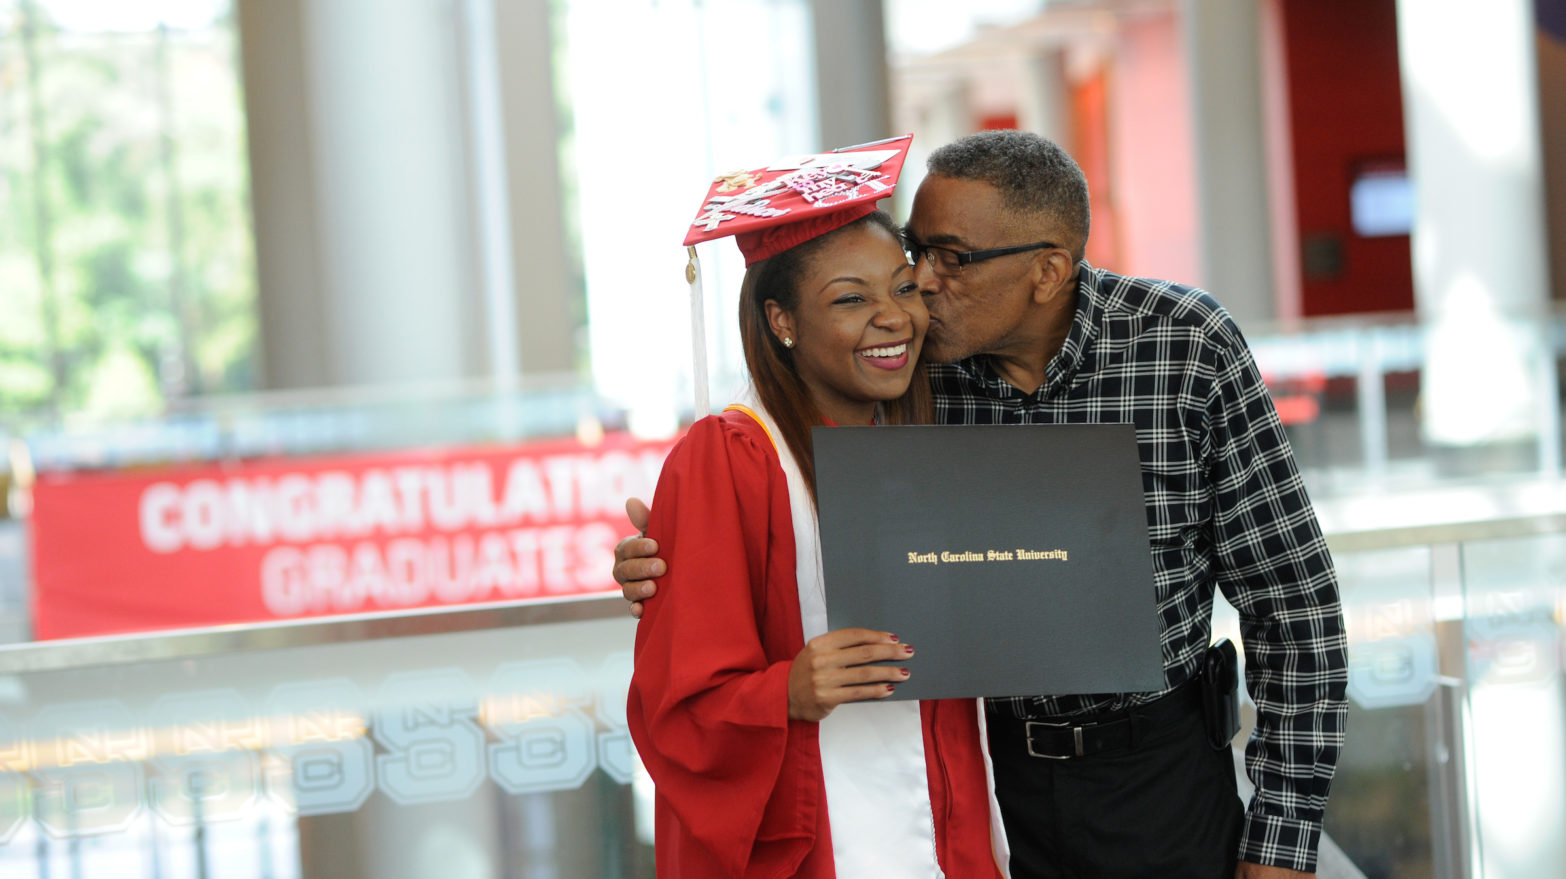 Departmental graduation ceremonies at Talley, 2016. Criminology grad Tatiana DeBerry is congratulated by family. Photo by Marc Hall